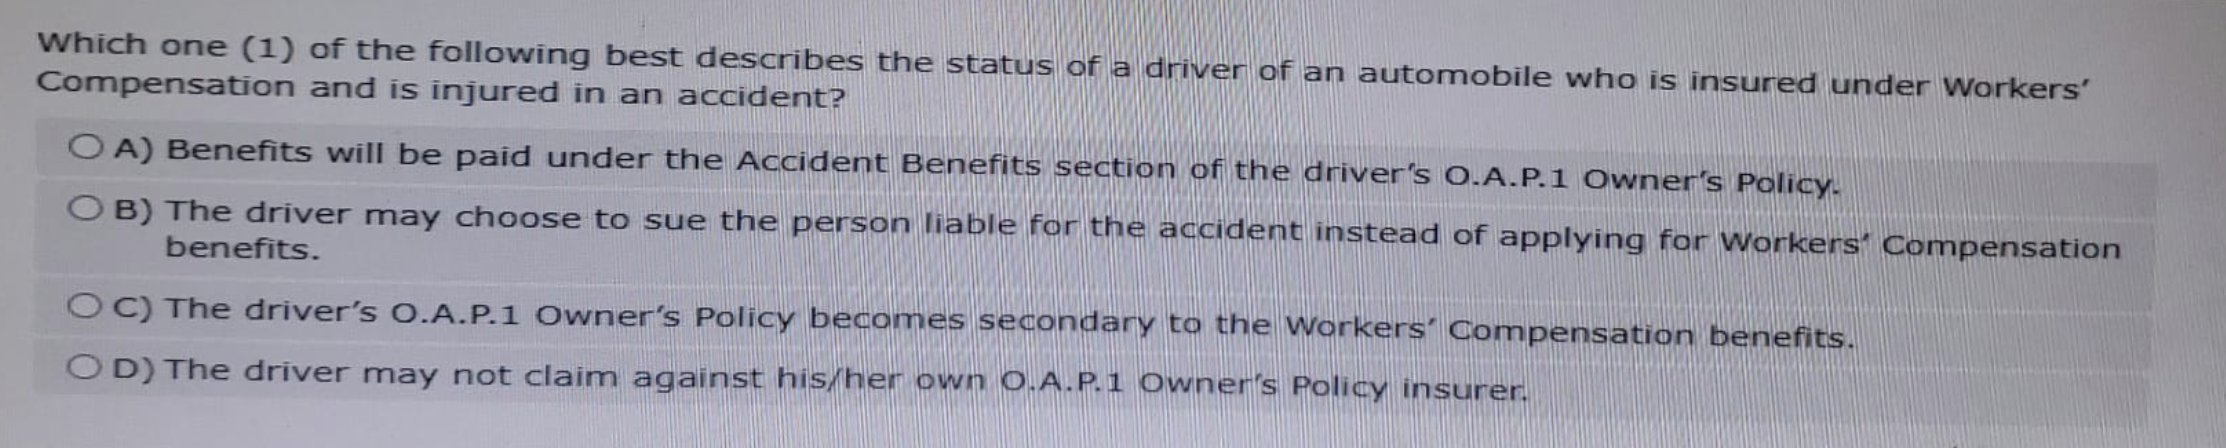 Which one (1) of the following best describes the status of a driver of an automobile who is insured under Workers'
Compensation and is injured in an accident?
OA) Benefits will be paid under the Accident Benefits section of the driver's O.A.P.1 Owner's Policy.
OB) The driver may choose to sue the person liable for the accident instead of applying for Workers Compensation
benefits.
OC) The driver's O.A.P.1 Owner's Policy becomes secondary to the Workers' Compensation benefits.
OD) The driver may not claim against his/her own O.A.P.1 Owner's Policy insurer.